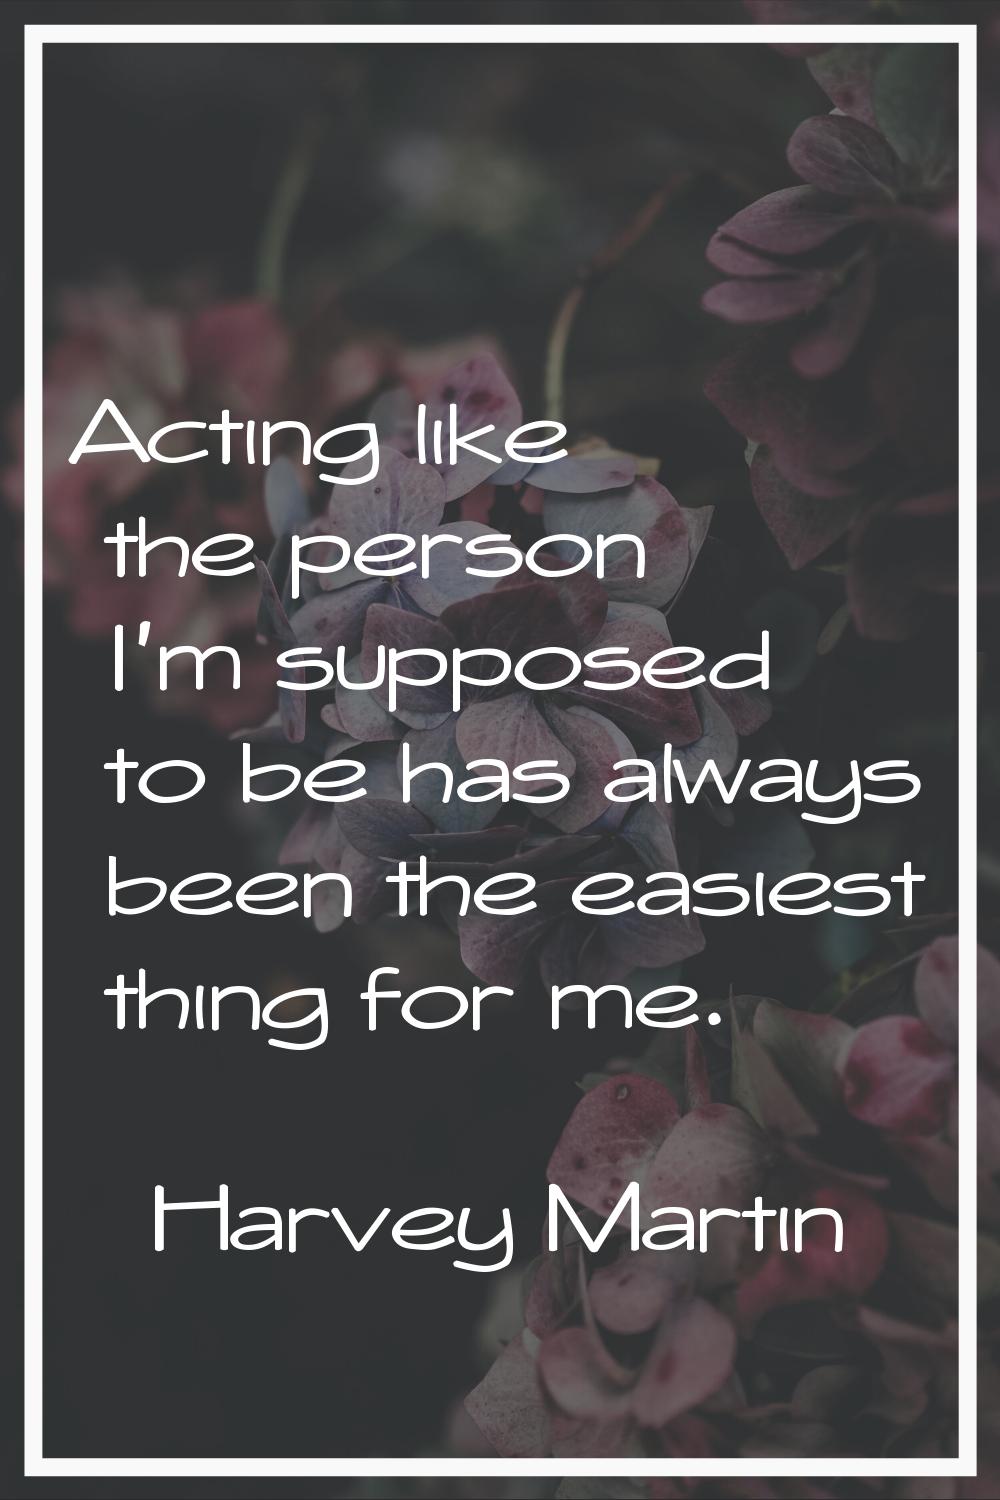 Acting like the person I'm supposed to be has always been the easiest thing for me.